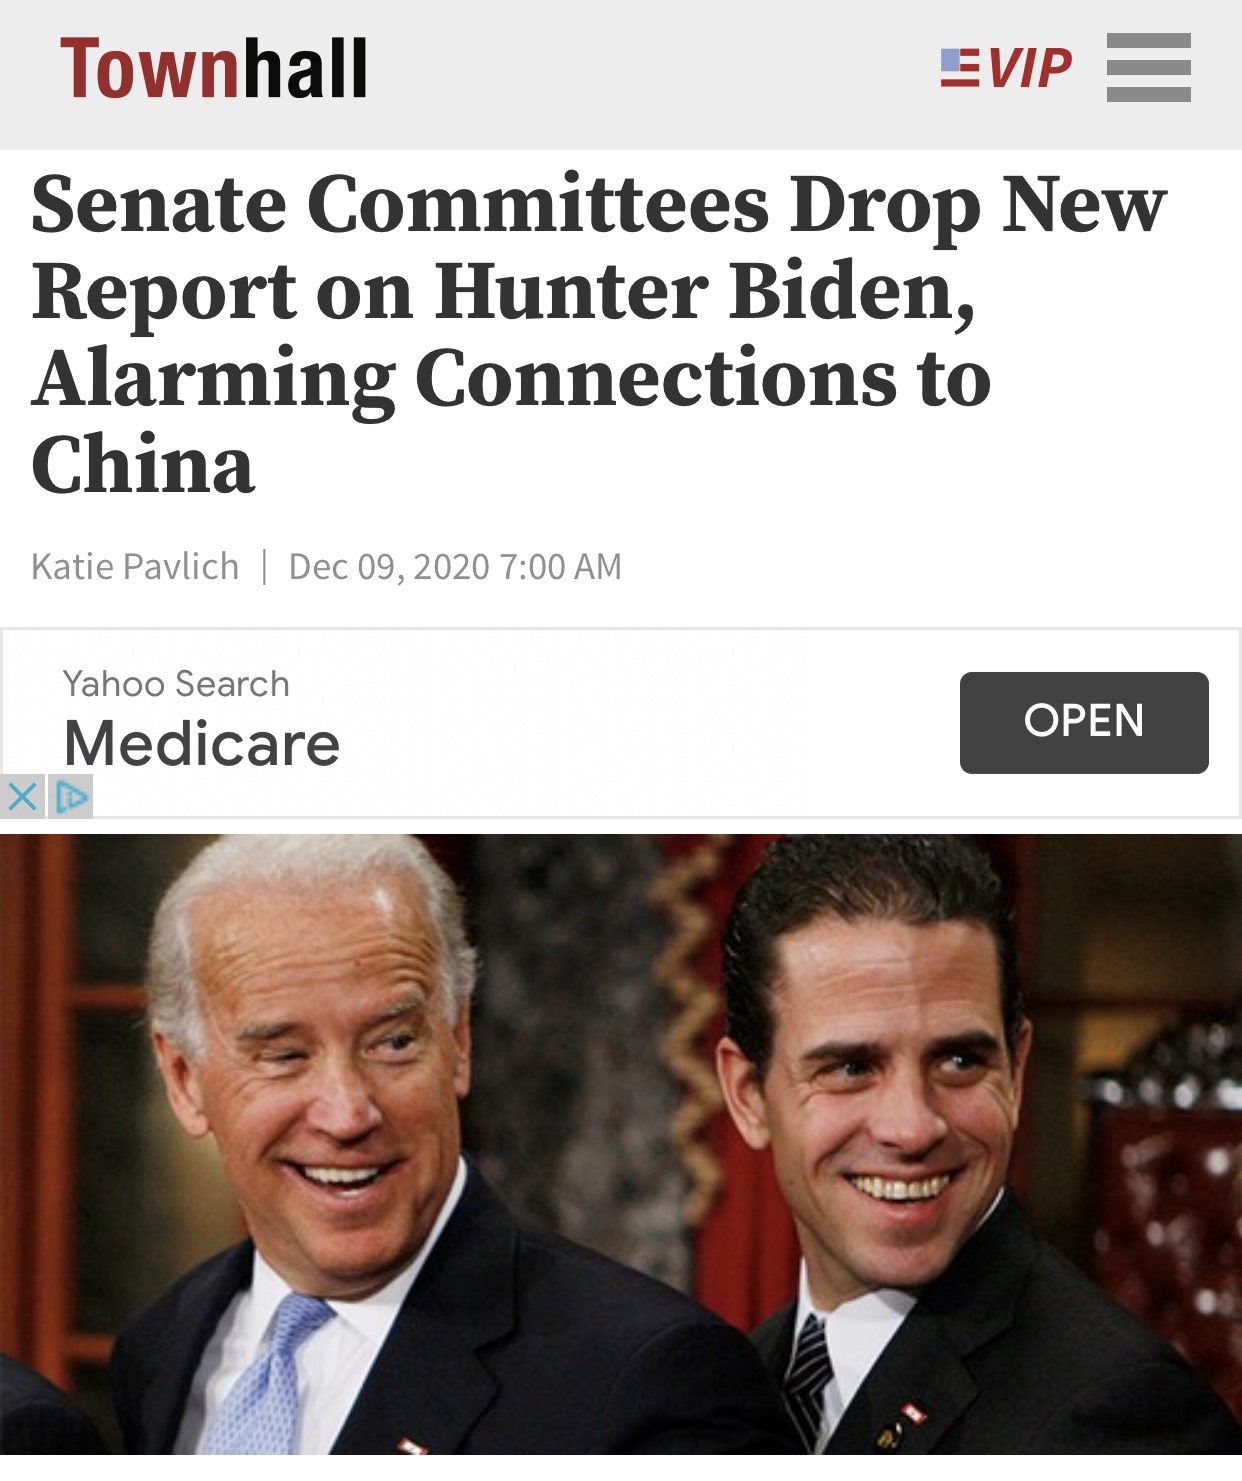 Senate Committees Drop New Report on Hunter Biden, Alarming Connections to China